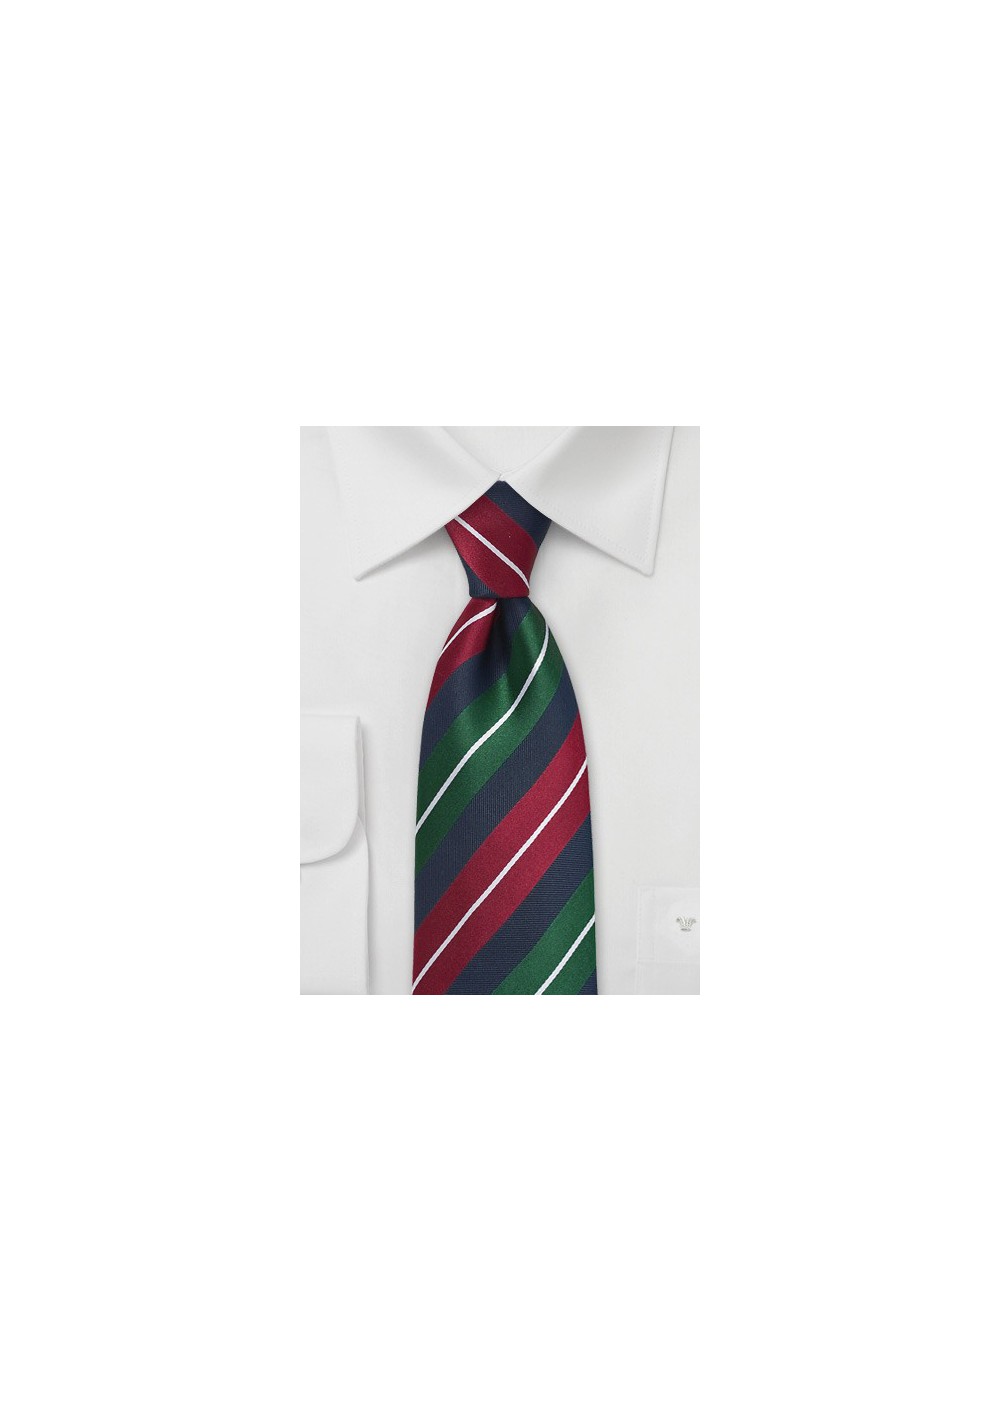 Striped Tie in Red, Hunter-Green, and Navy